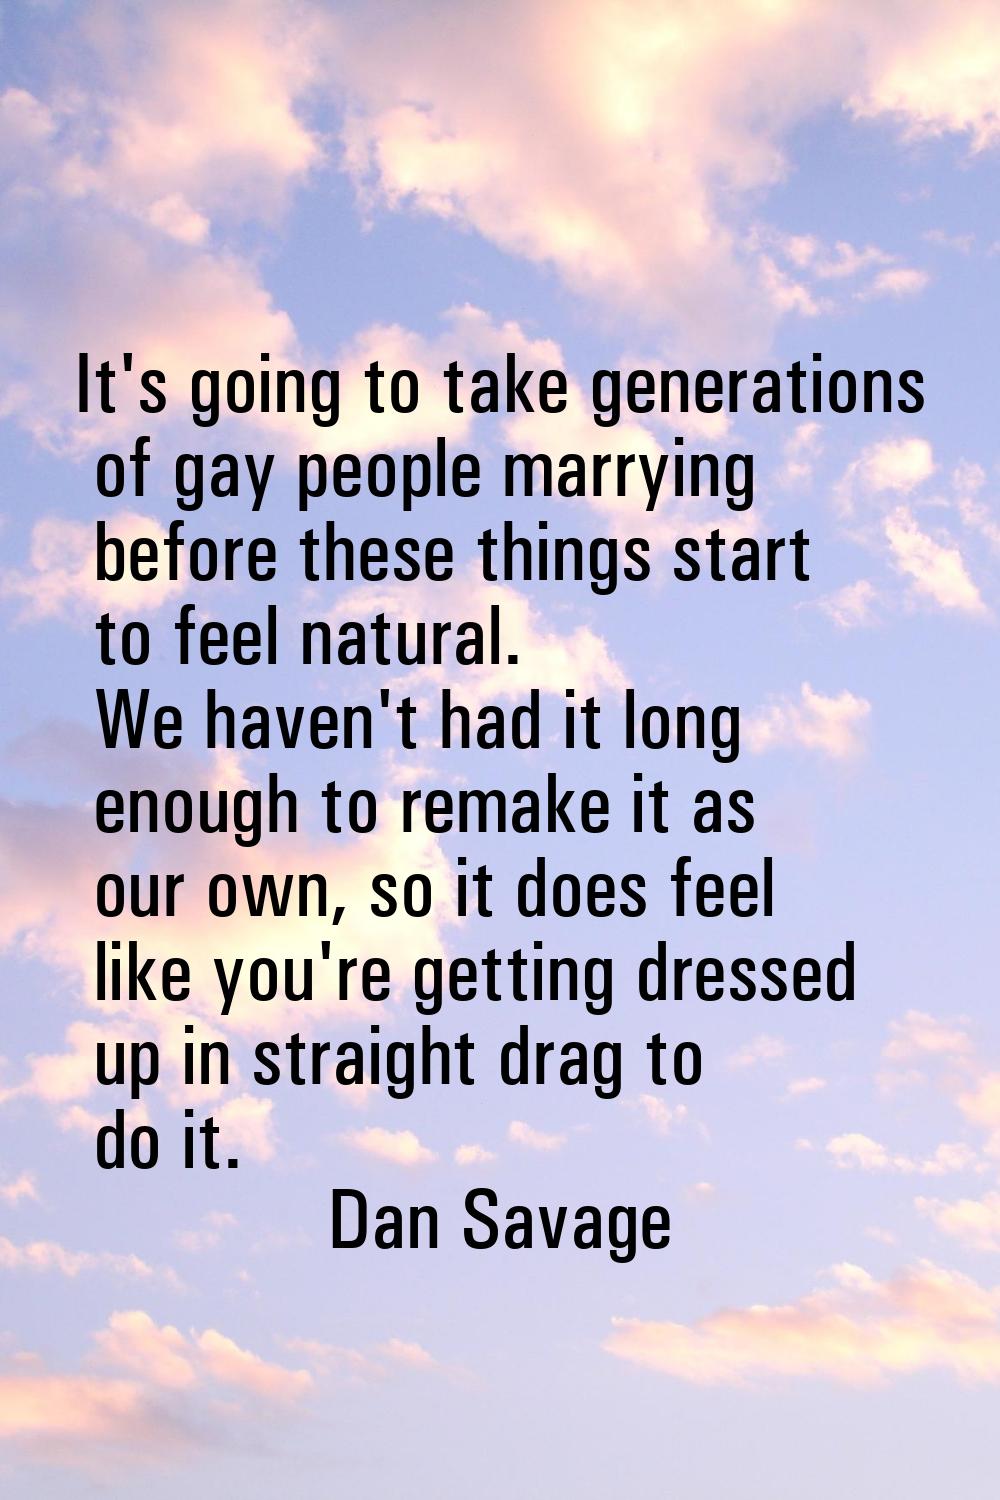 It's going to take generations of gay people marrying before these things start to feel natural. We